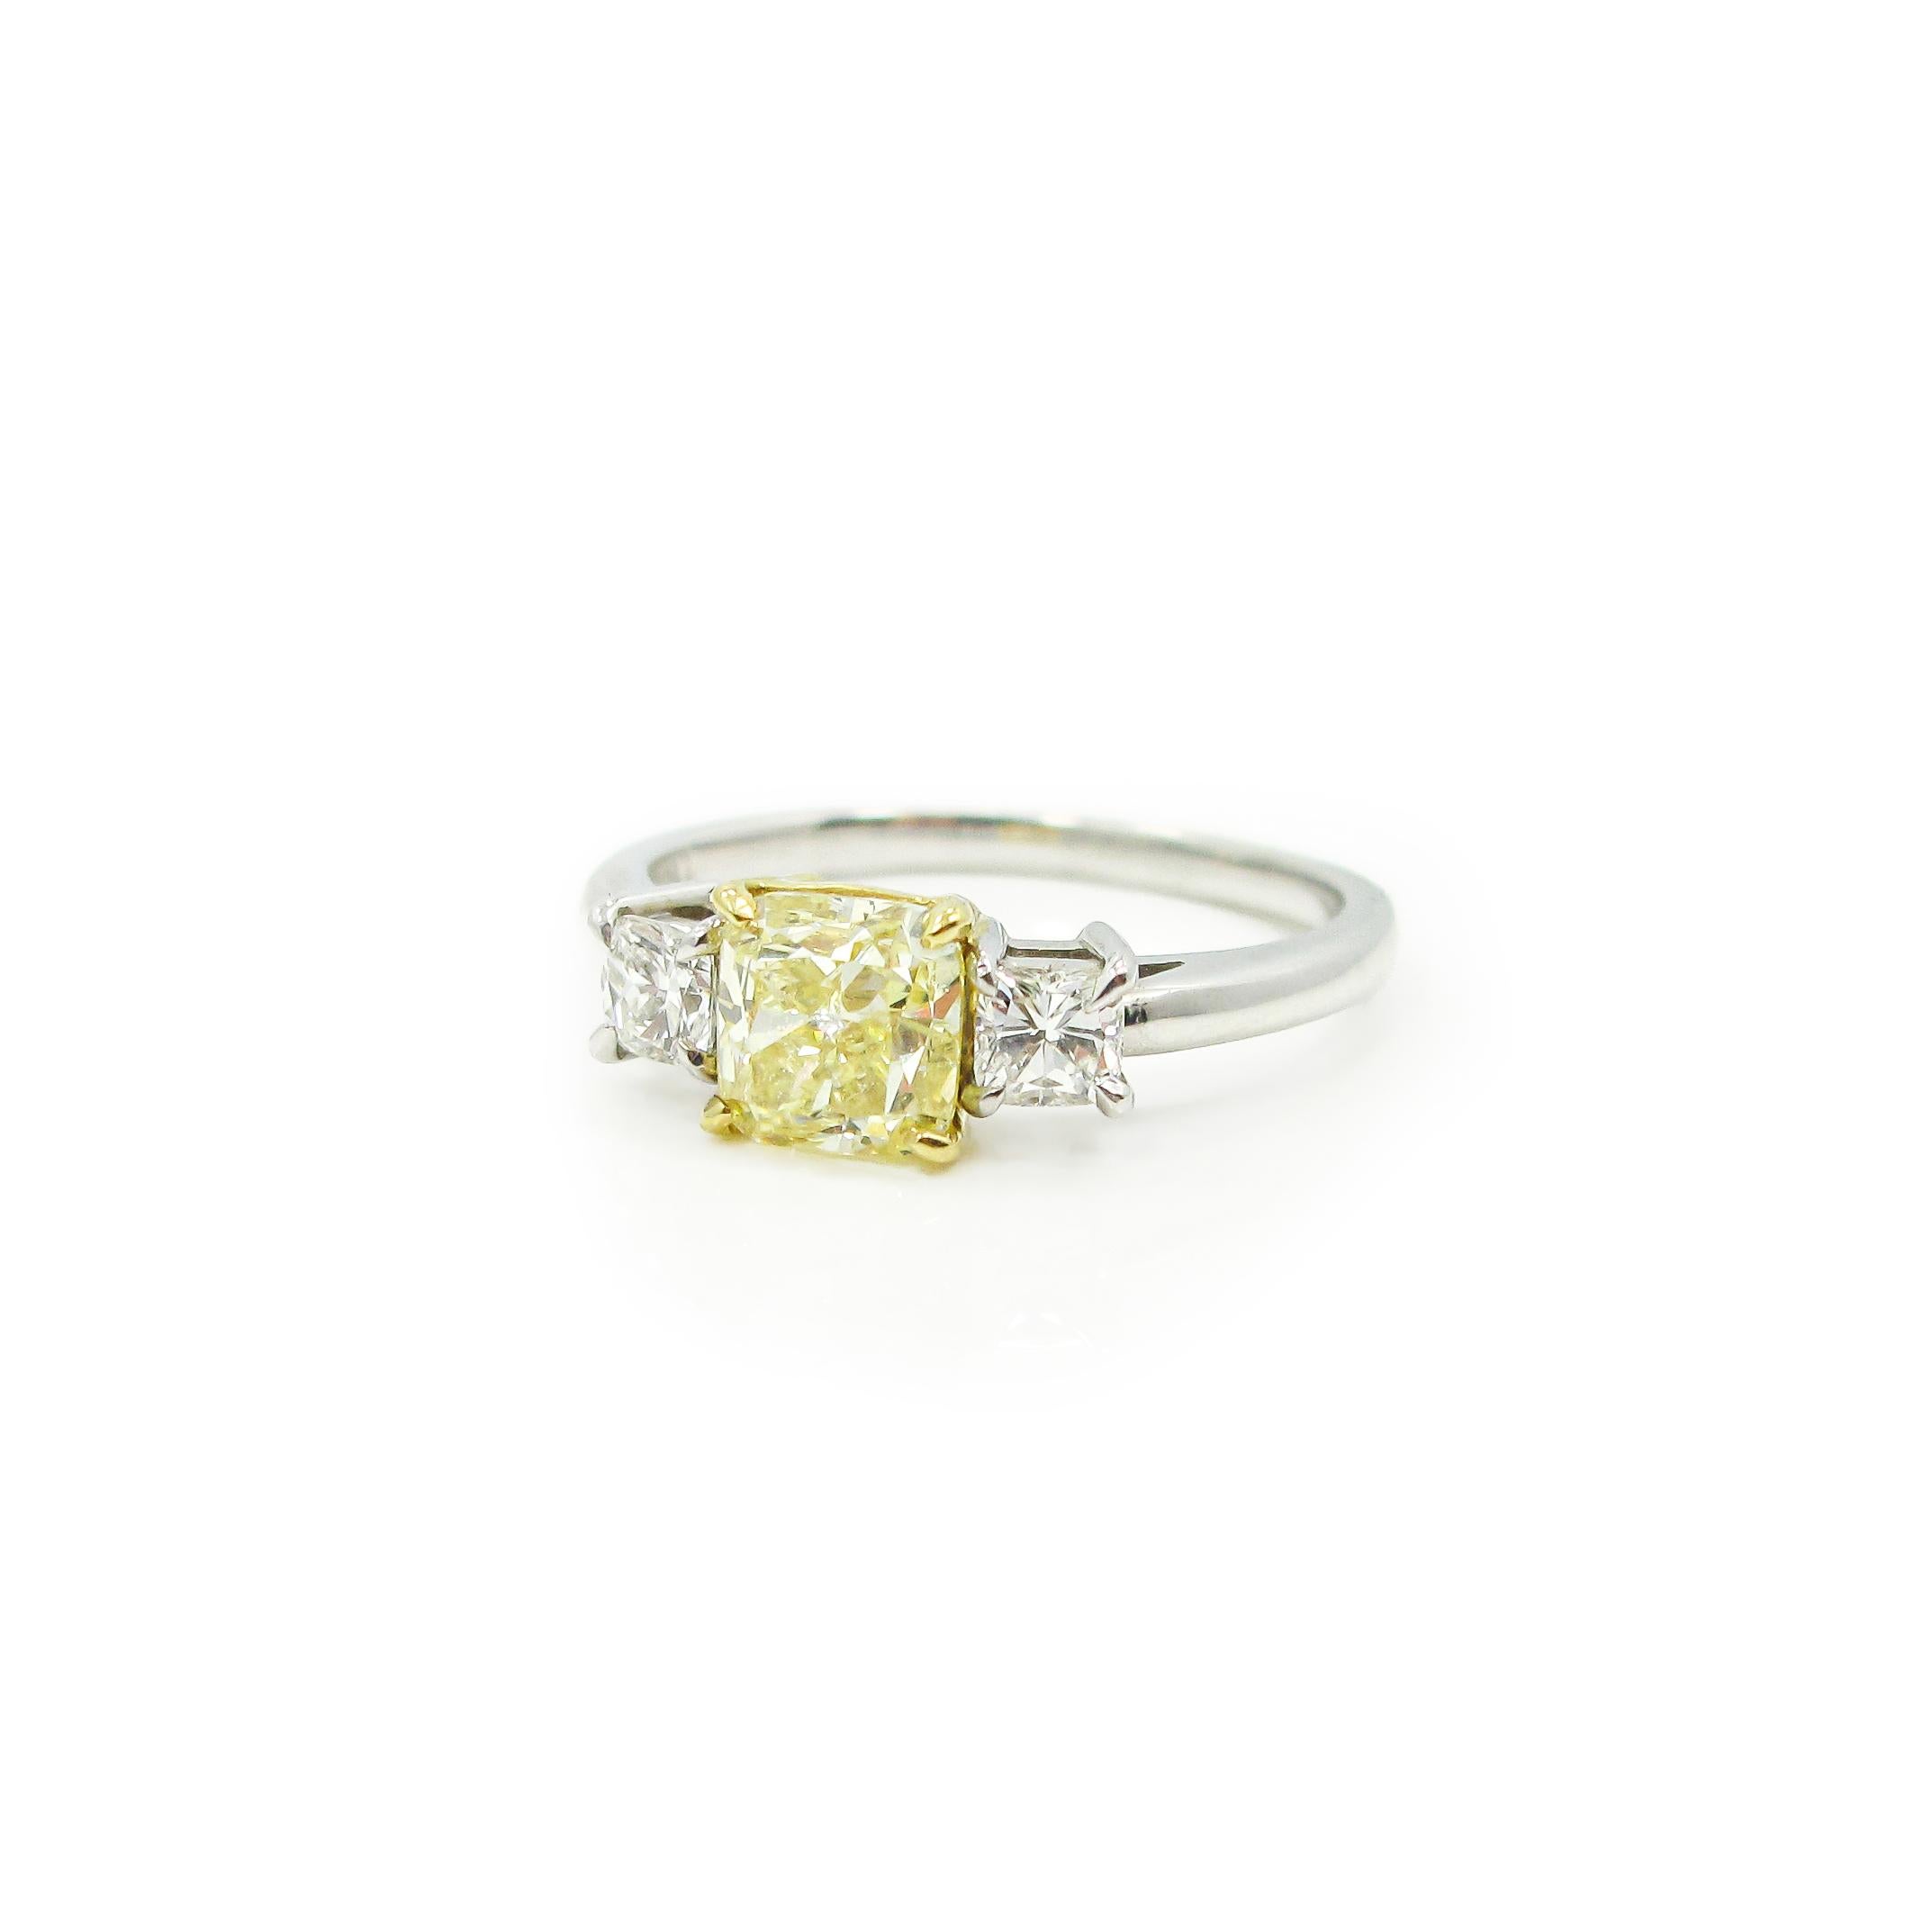 The center stone is a fancy yellow cushion cut diamond weighing 1.04ct. and is accompanied by GIA certification. The yellow diamond is set in an 18k yellow gold basket between two cushion cut diamonds weighing approximately 0.31ct total weight, F to